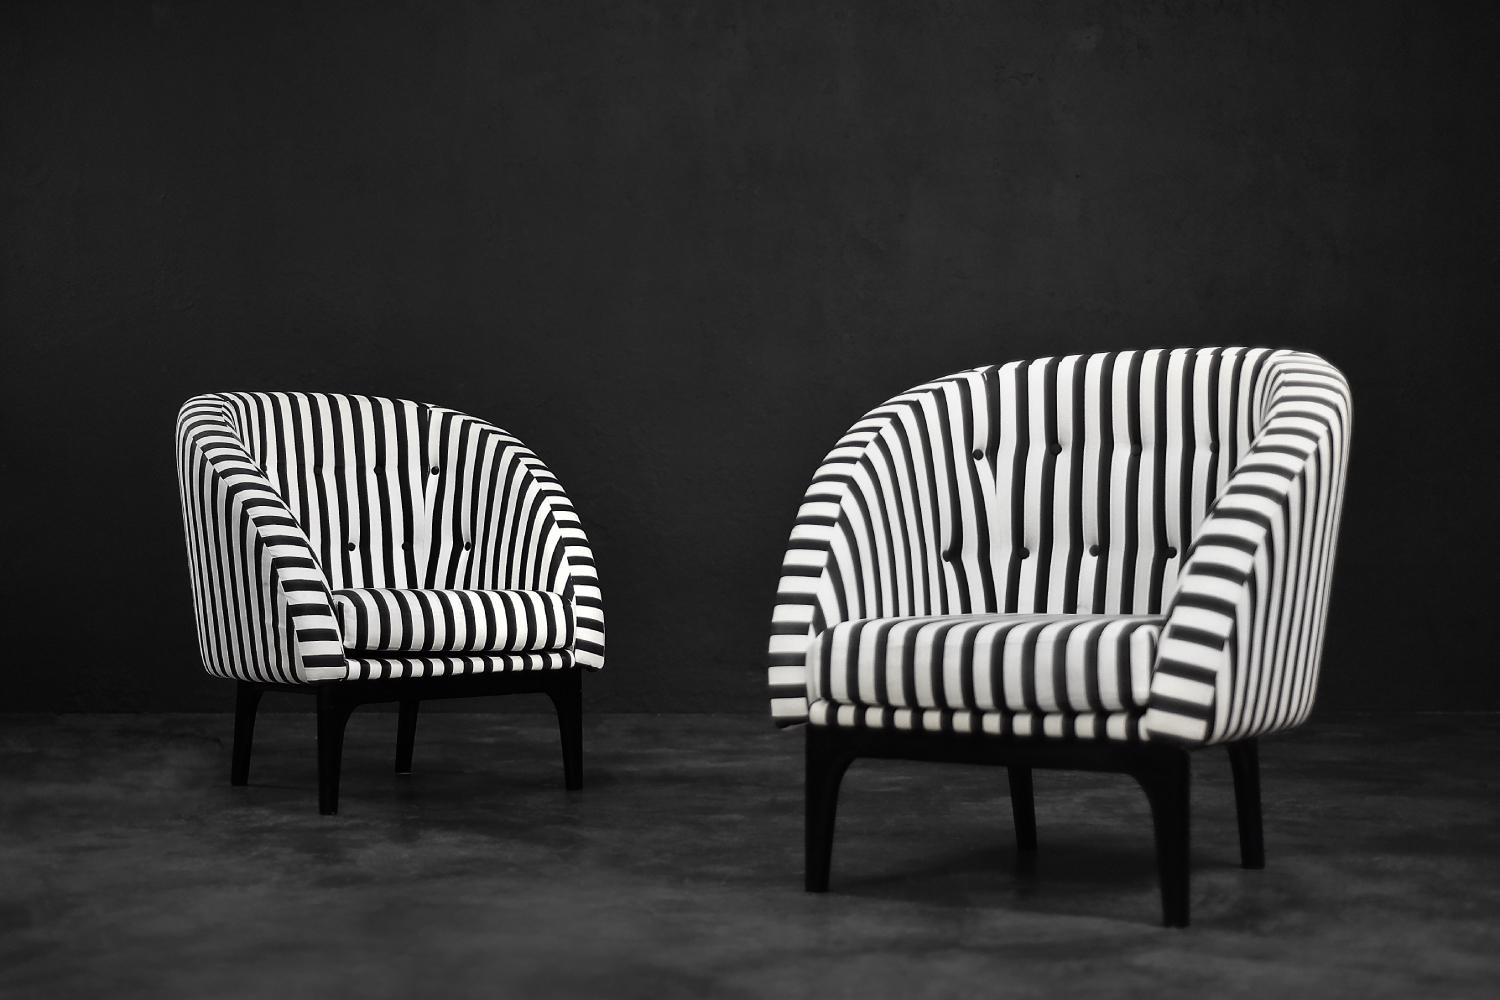 This set of two armchairs was made in Denmark during the 1960s. They are upholstered in a thick black and white striped fabric. Black and white is a classic, timeless color combination. In addition, the striped pattern due dynamics and brings